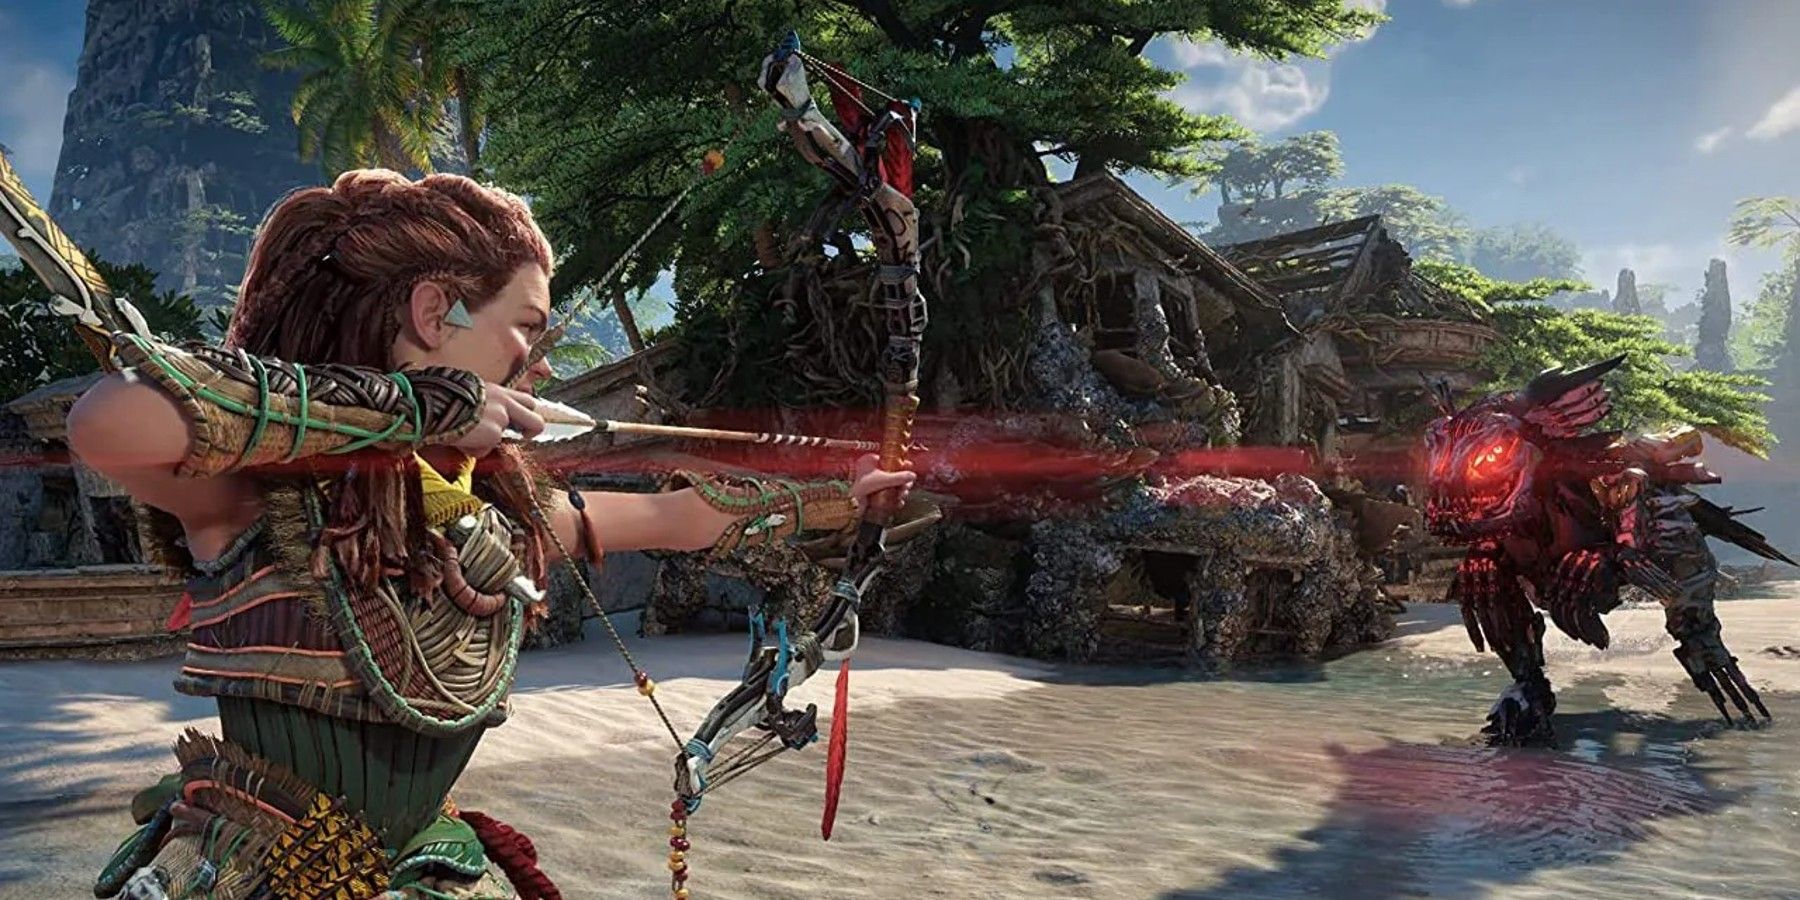 Aloy fighting a Clawstrider in San Francisco in Forbidden West